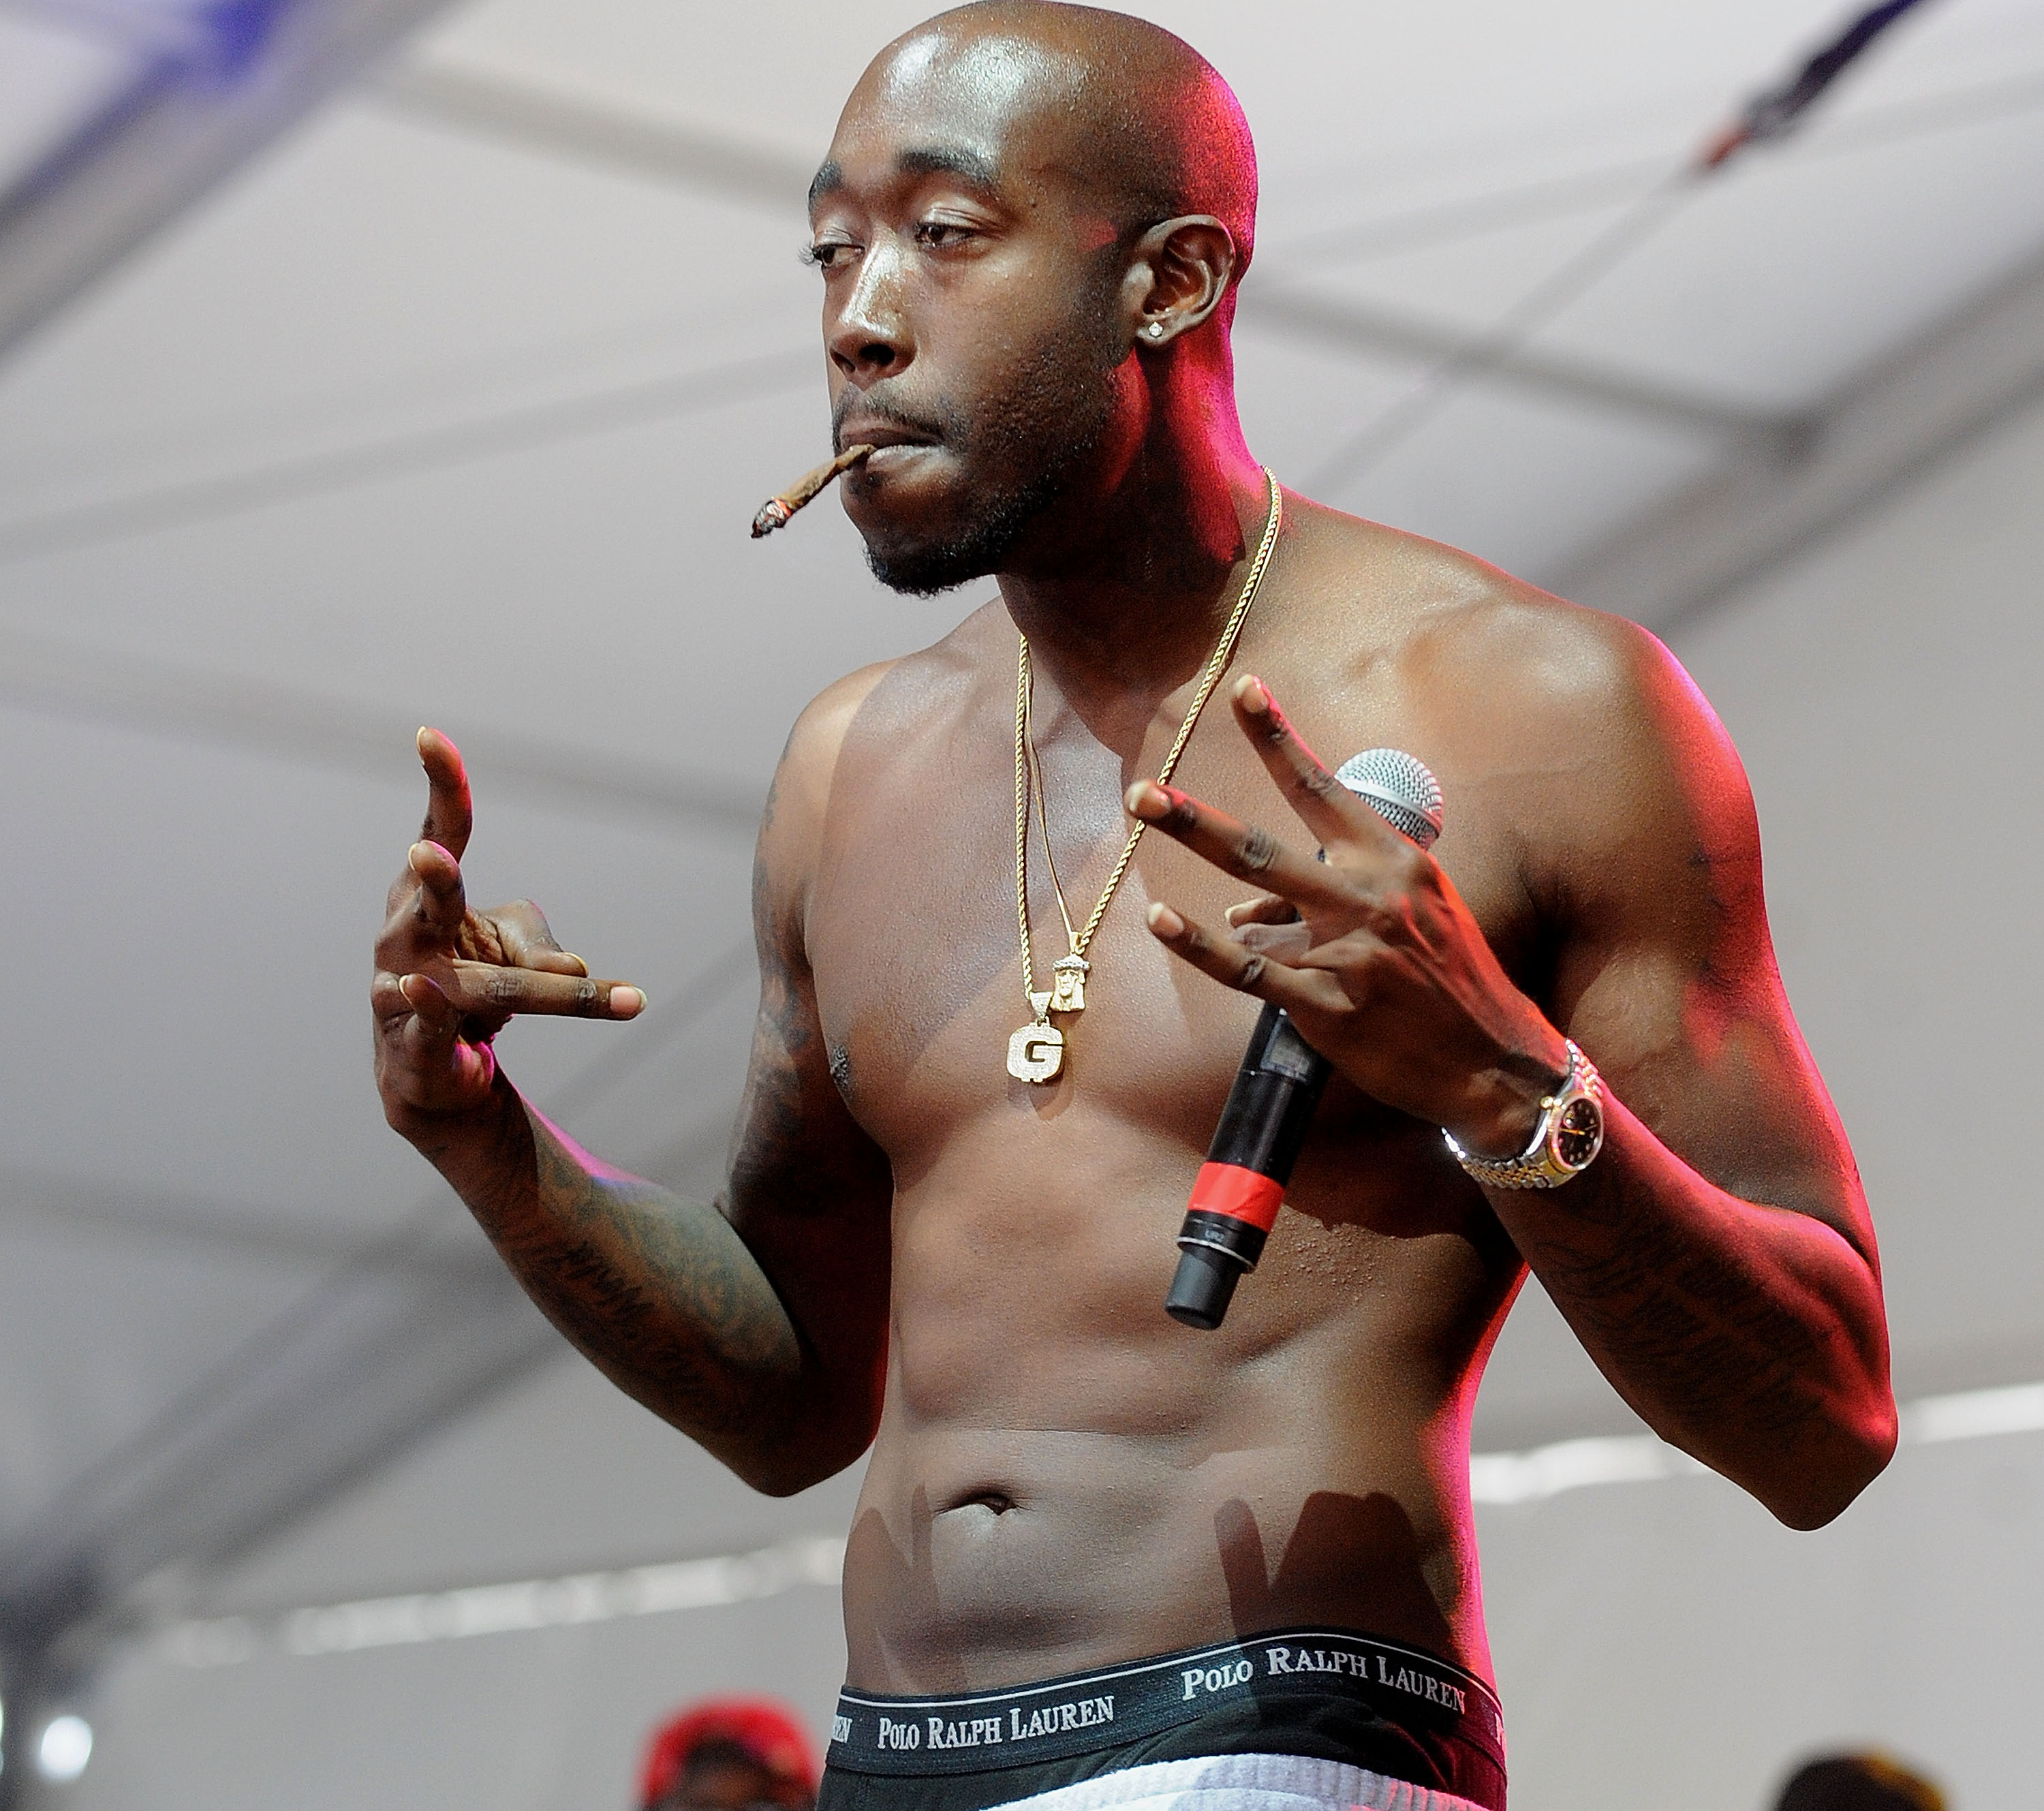 Freddie Gibbs On His Beef Philosophy: “I’m A Comedian”